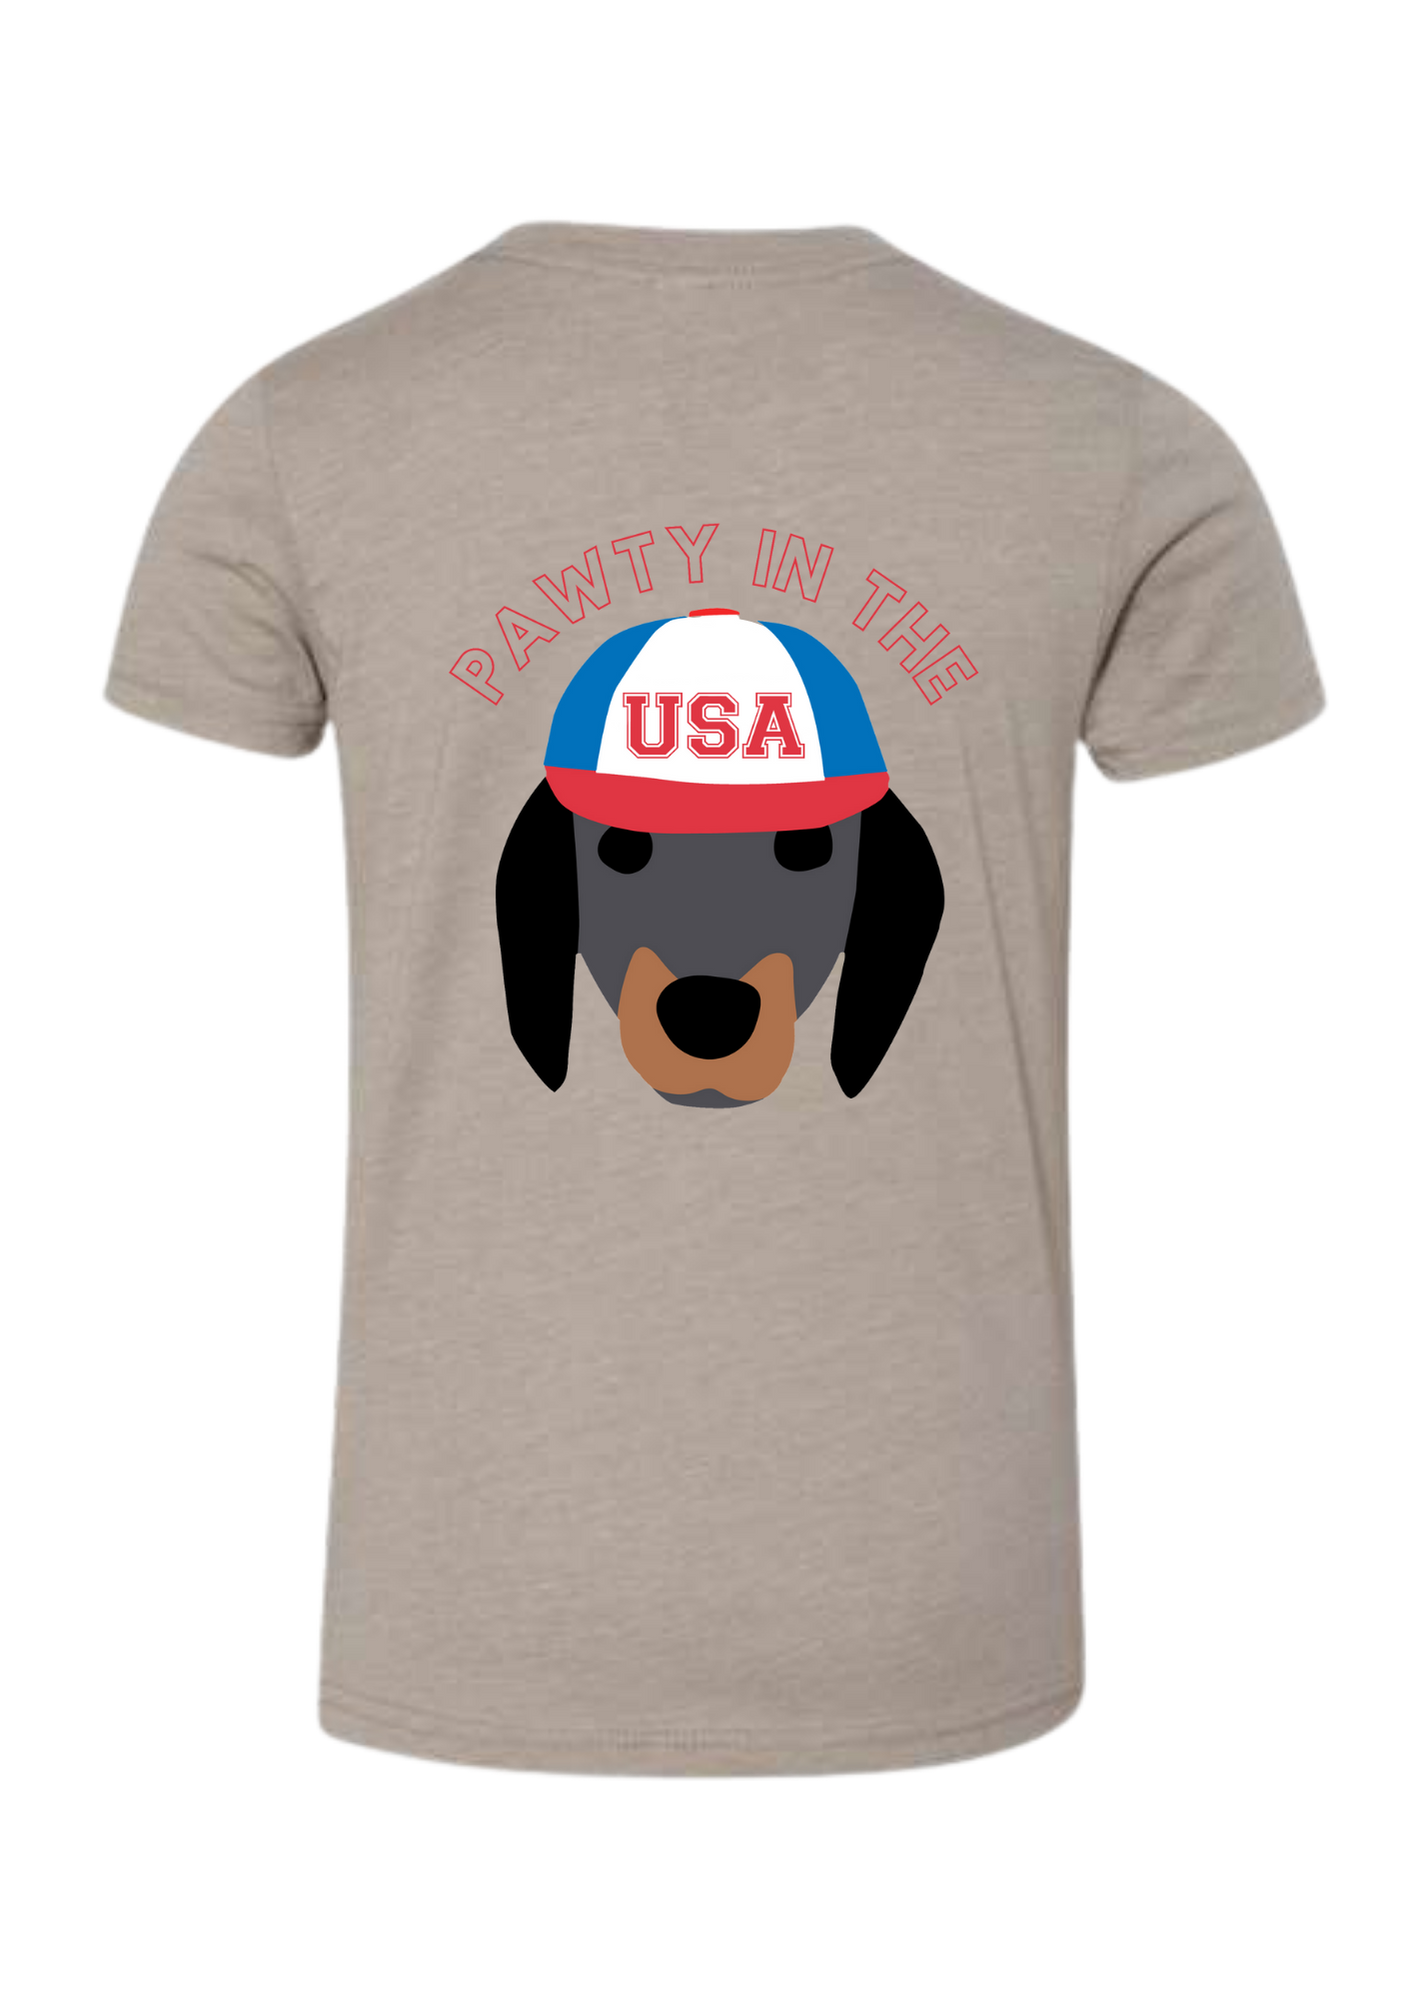 Pawty in the USA | Kids Tee | RTS-Sister Shirts-Sister Shirts, Cute & Custom Tees for Mama & Littles in Trussville, Alabama.